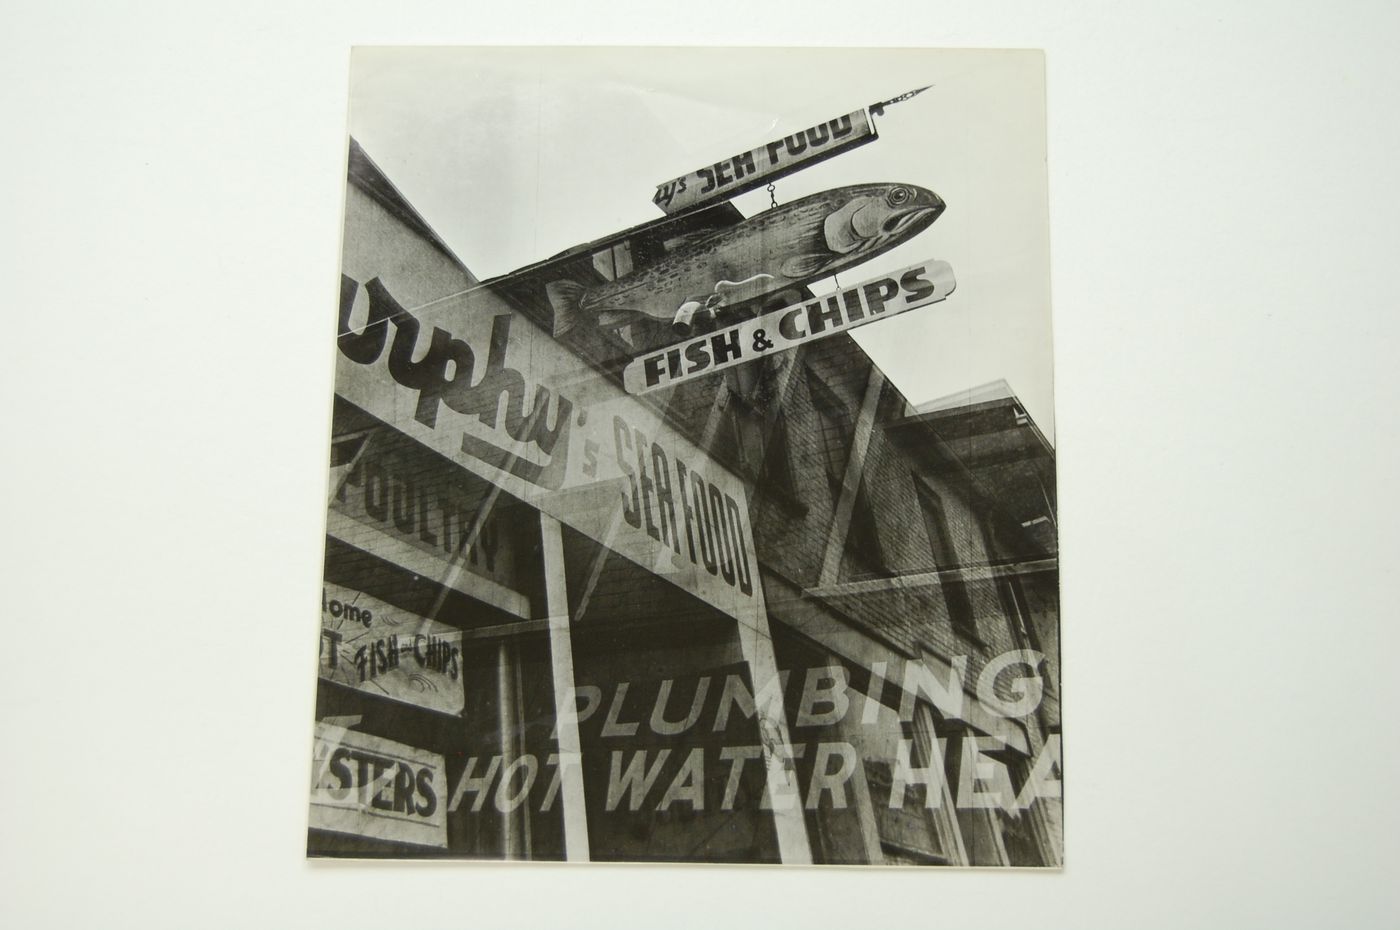 Multi exposure of close-ups of shop signs, probably Boston, United States